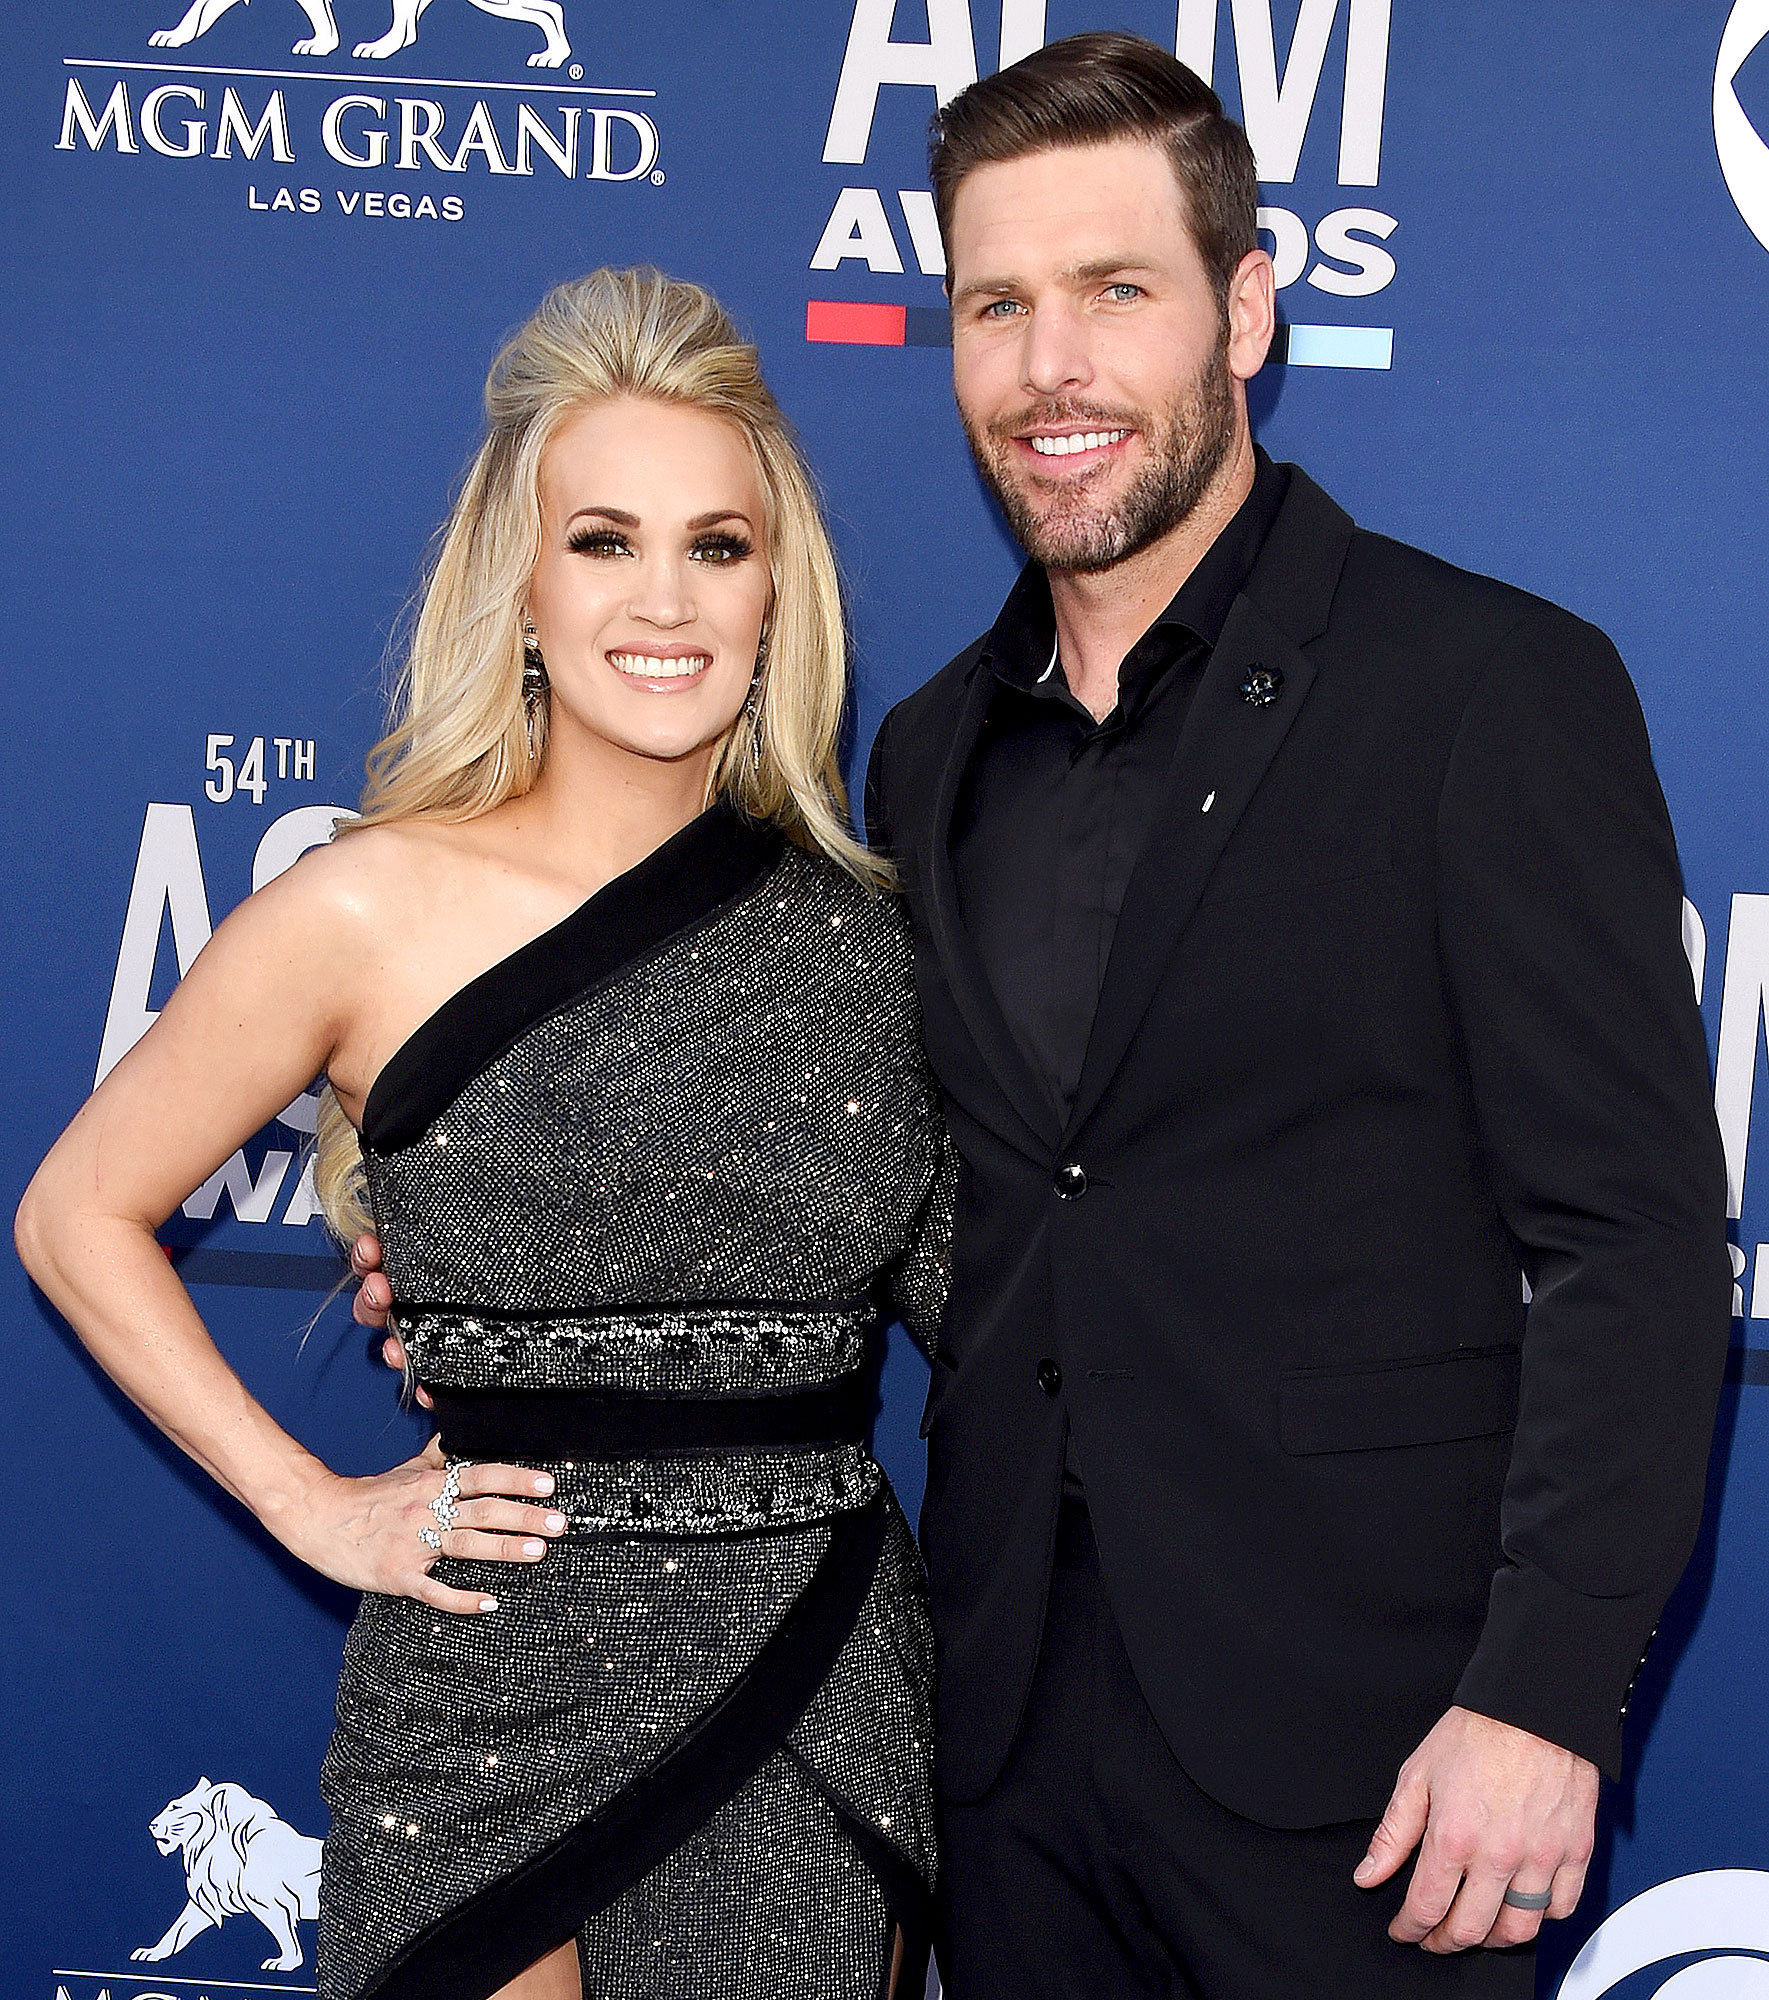 Who Is Carrie Underwood's Husband, Mike Fisher? - Inside the